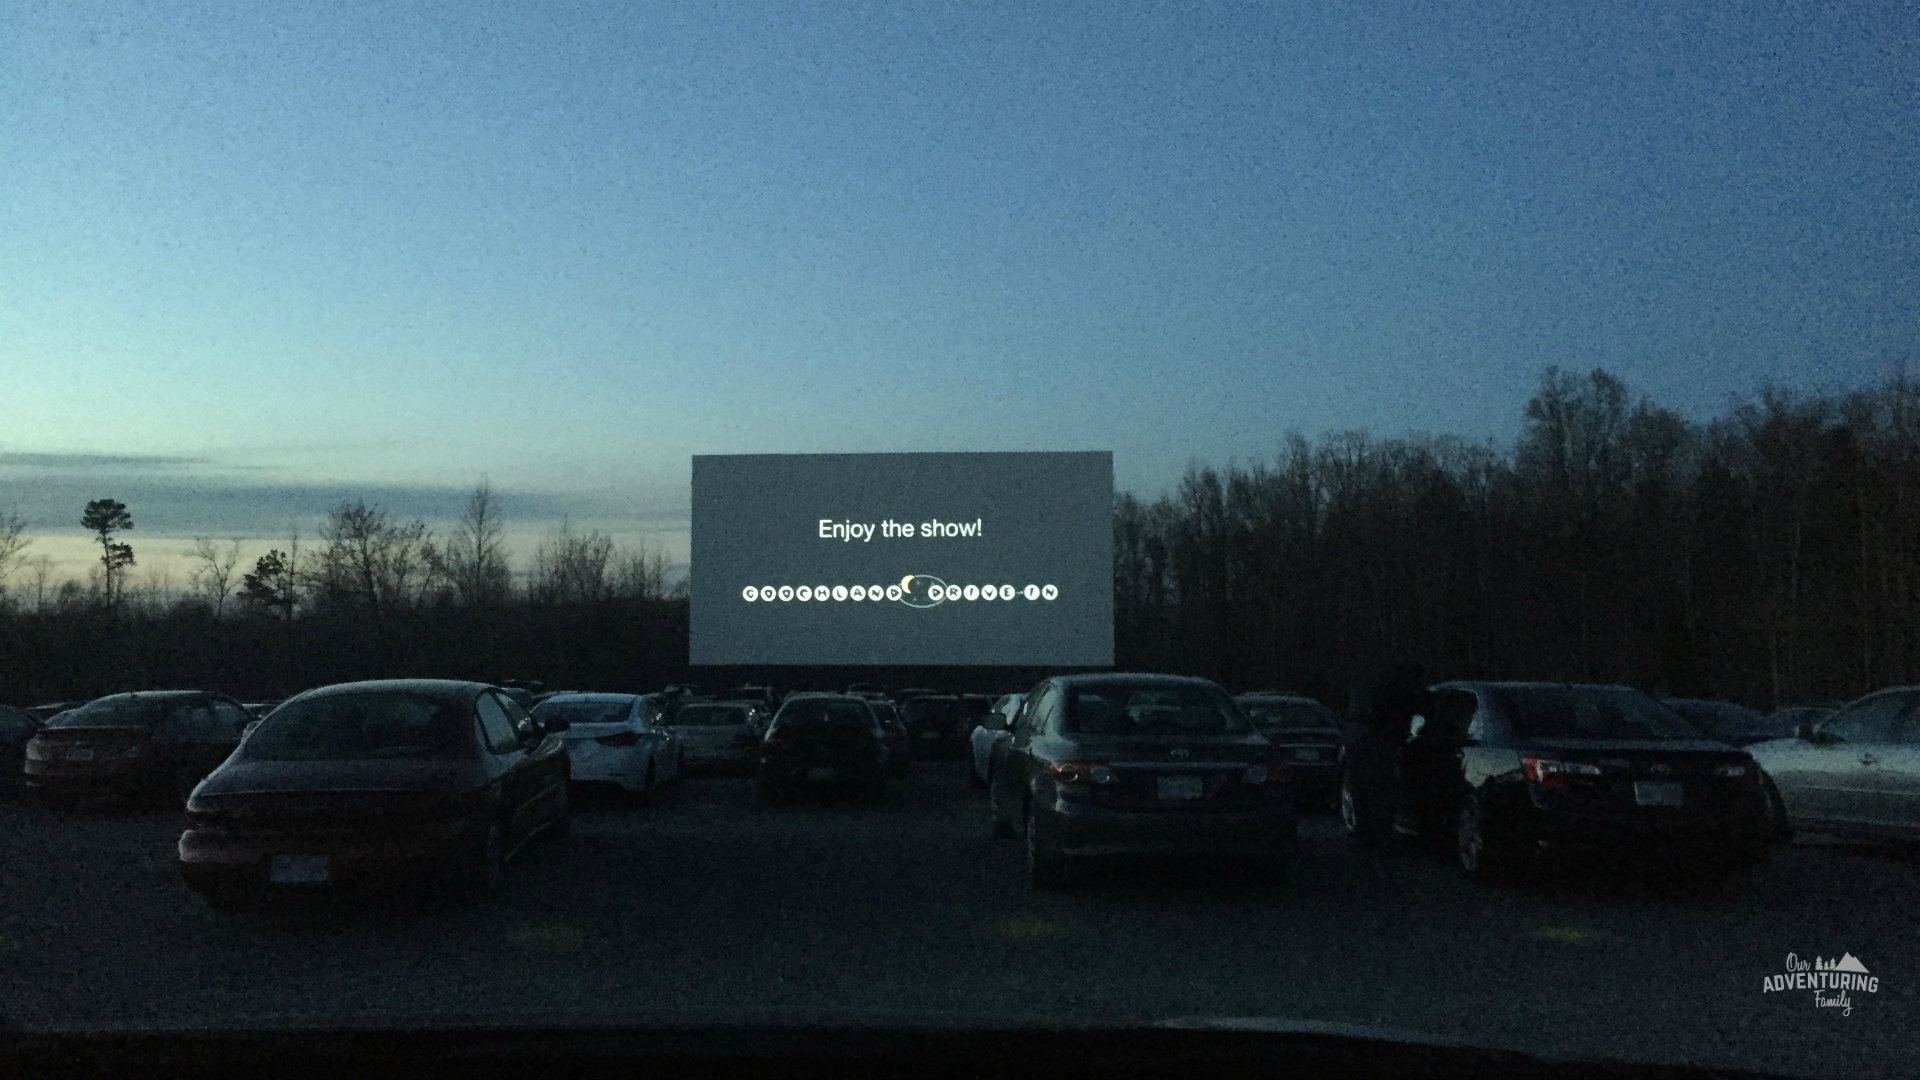 Have you ever been to a drive-in movie theater? They can be difficult to find, but they're so much fun! Read 8 reasons why we love drive-in theaters at ouradventuringfamily.com.